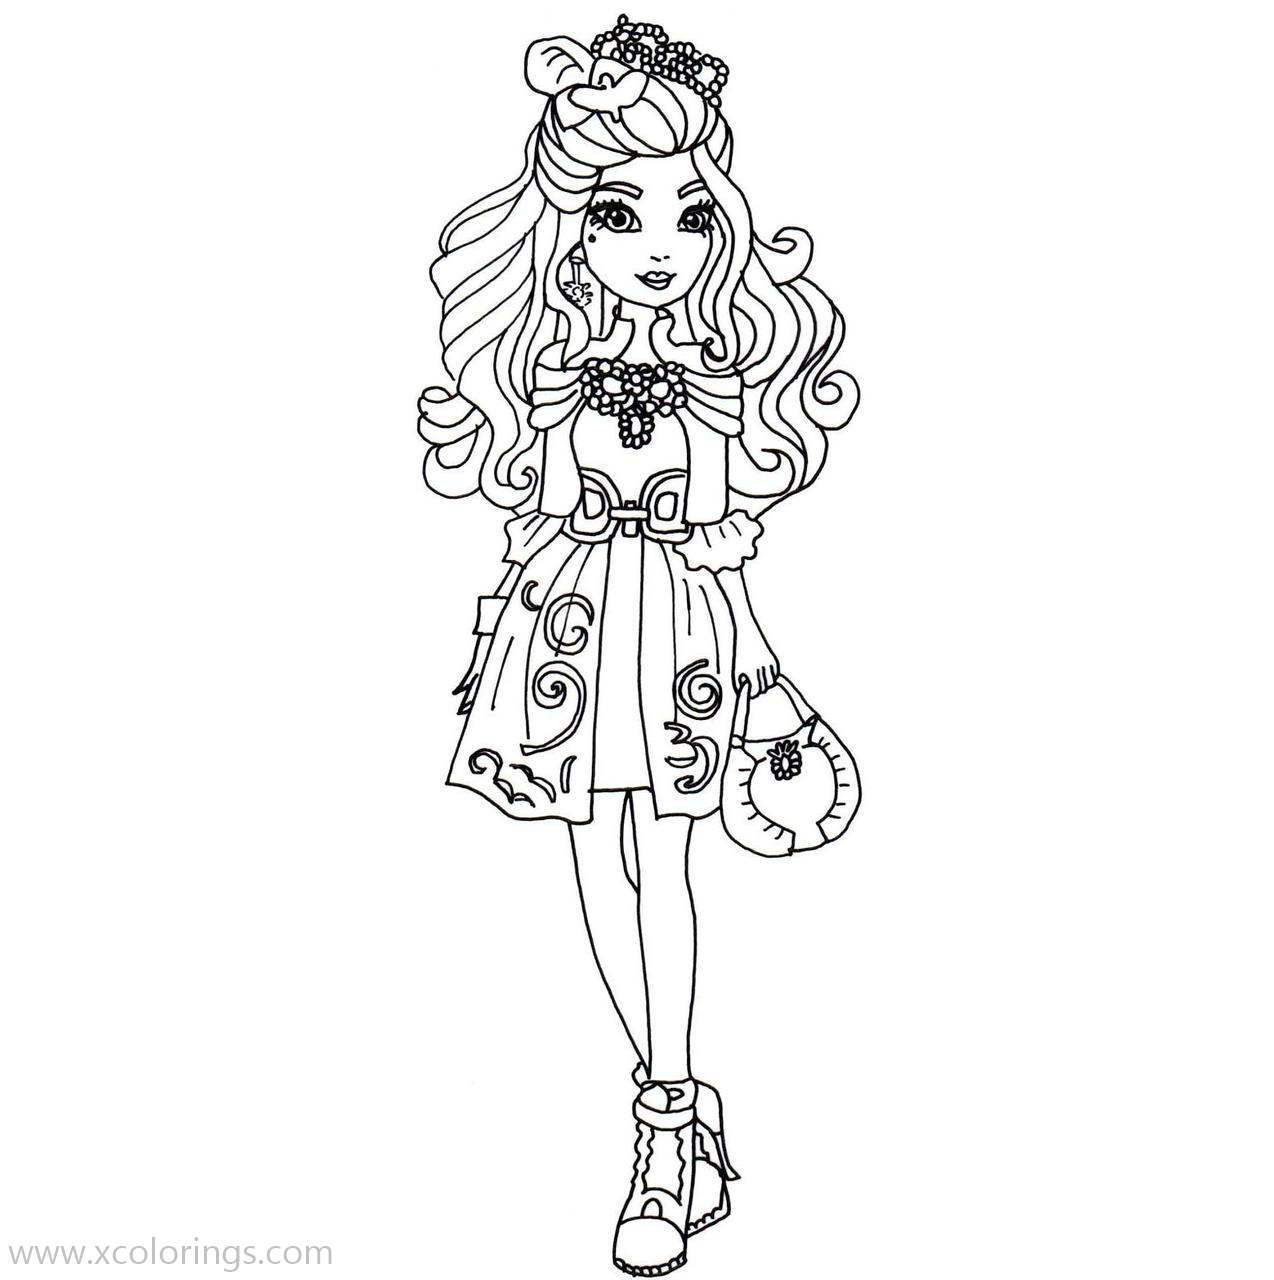 Free Darling Charming from Ever After High Coloring Pages printable